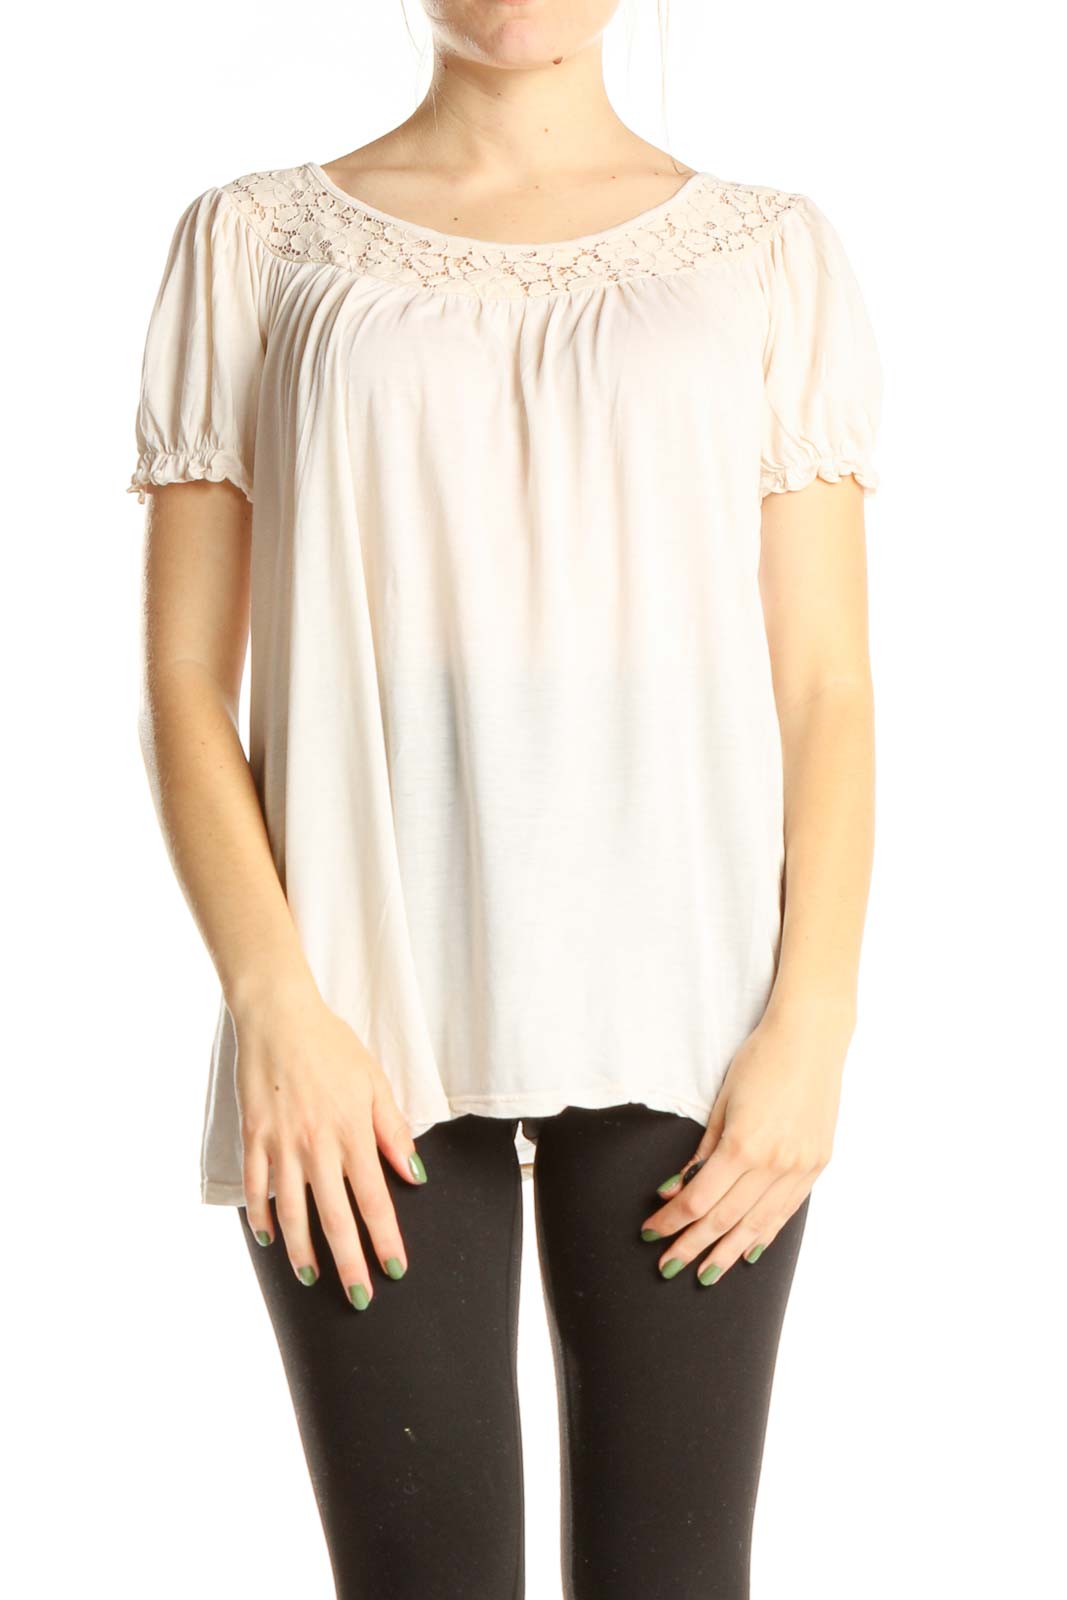 White Romantic Top With Lace Neckline Front